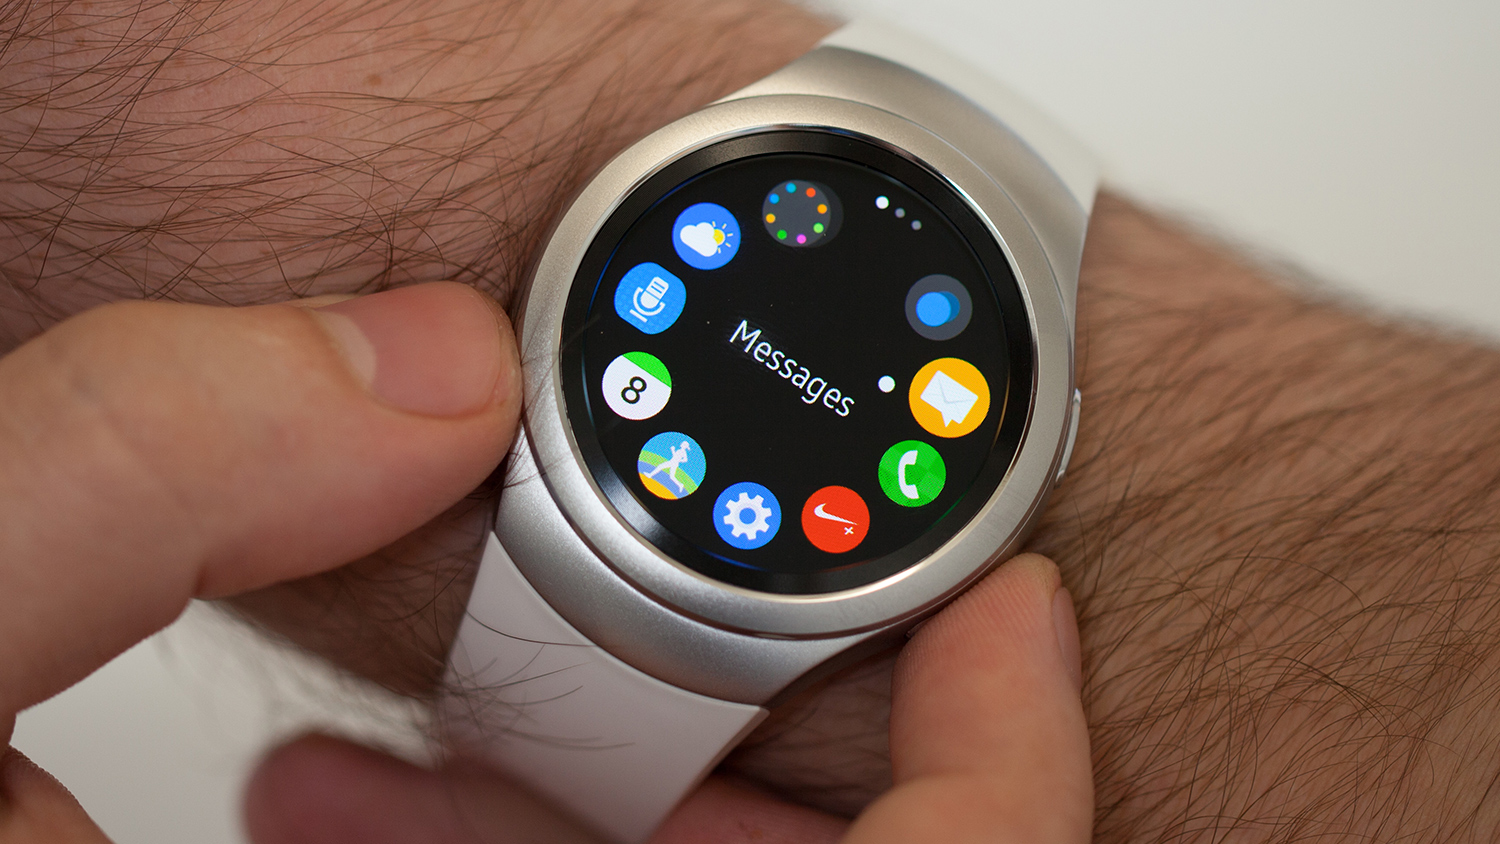 Samsung Gear S2 | Full Review, Specs, Price, and More | Digital Trends